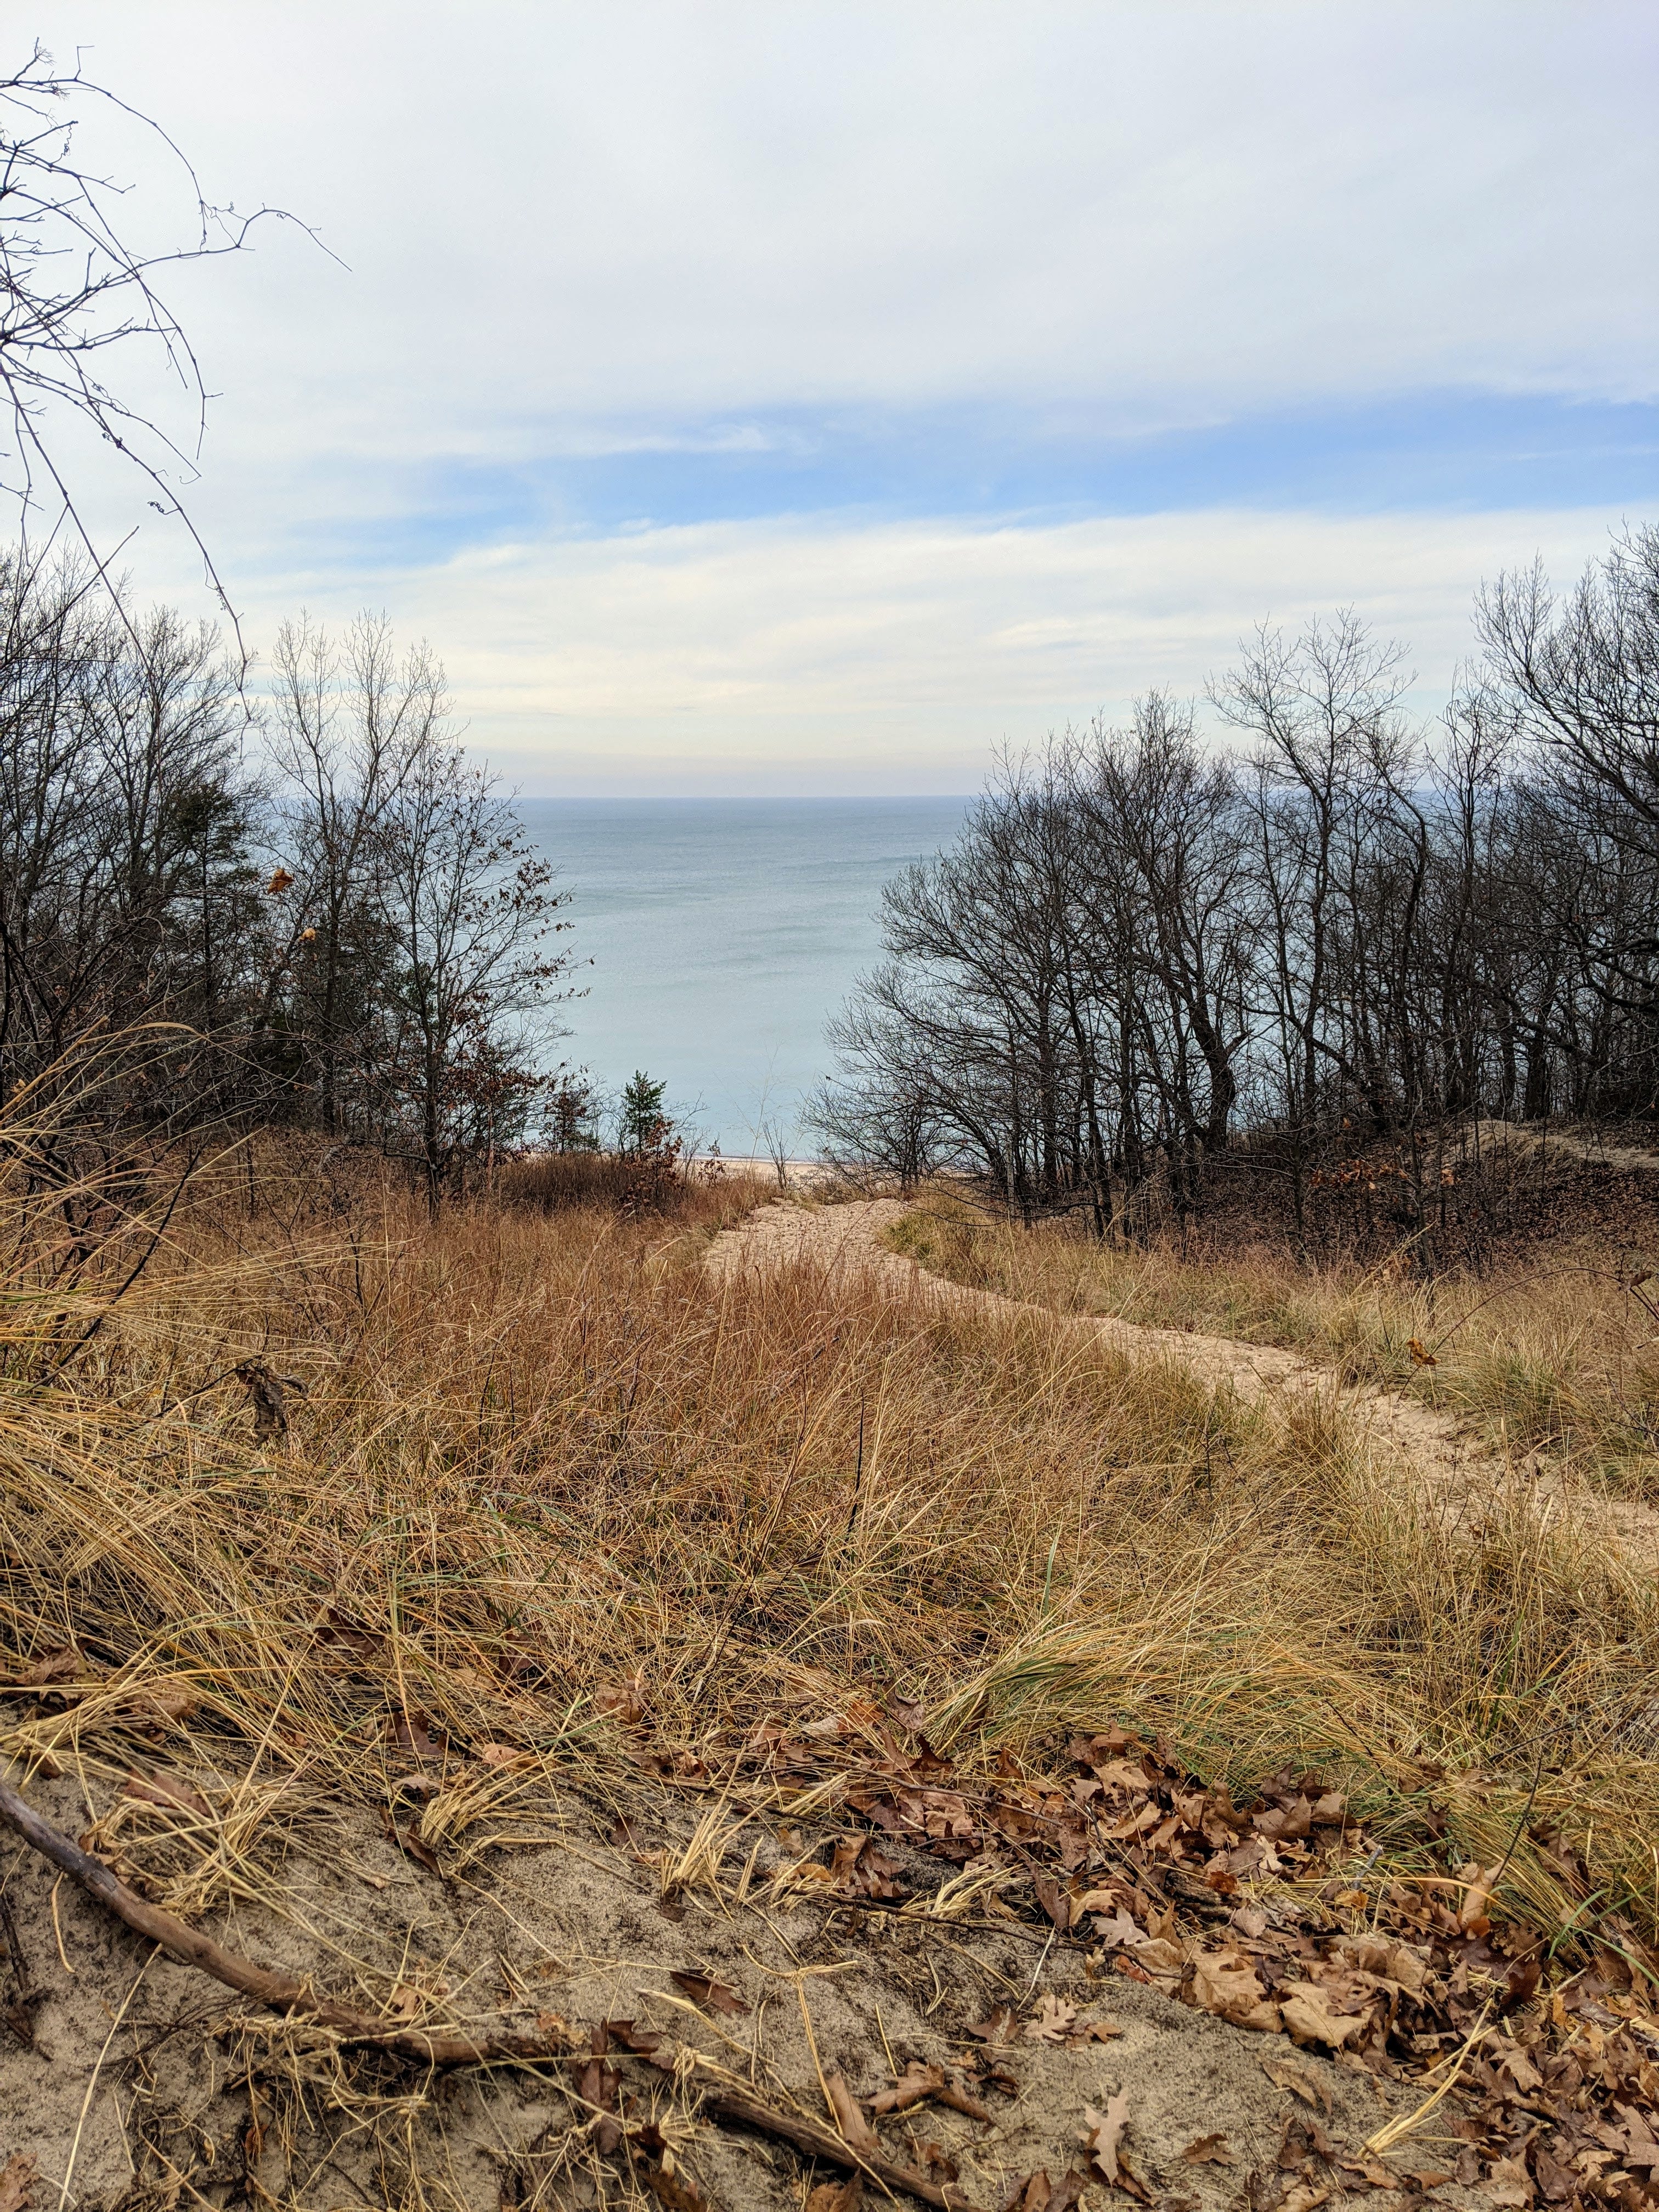 HIke out on the dune trails to see views of Lake Michigan. This is shot from Trail 8, along the 3-Dune Challenge trails.